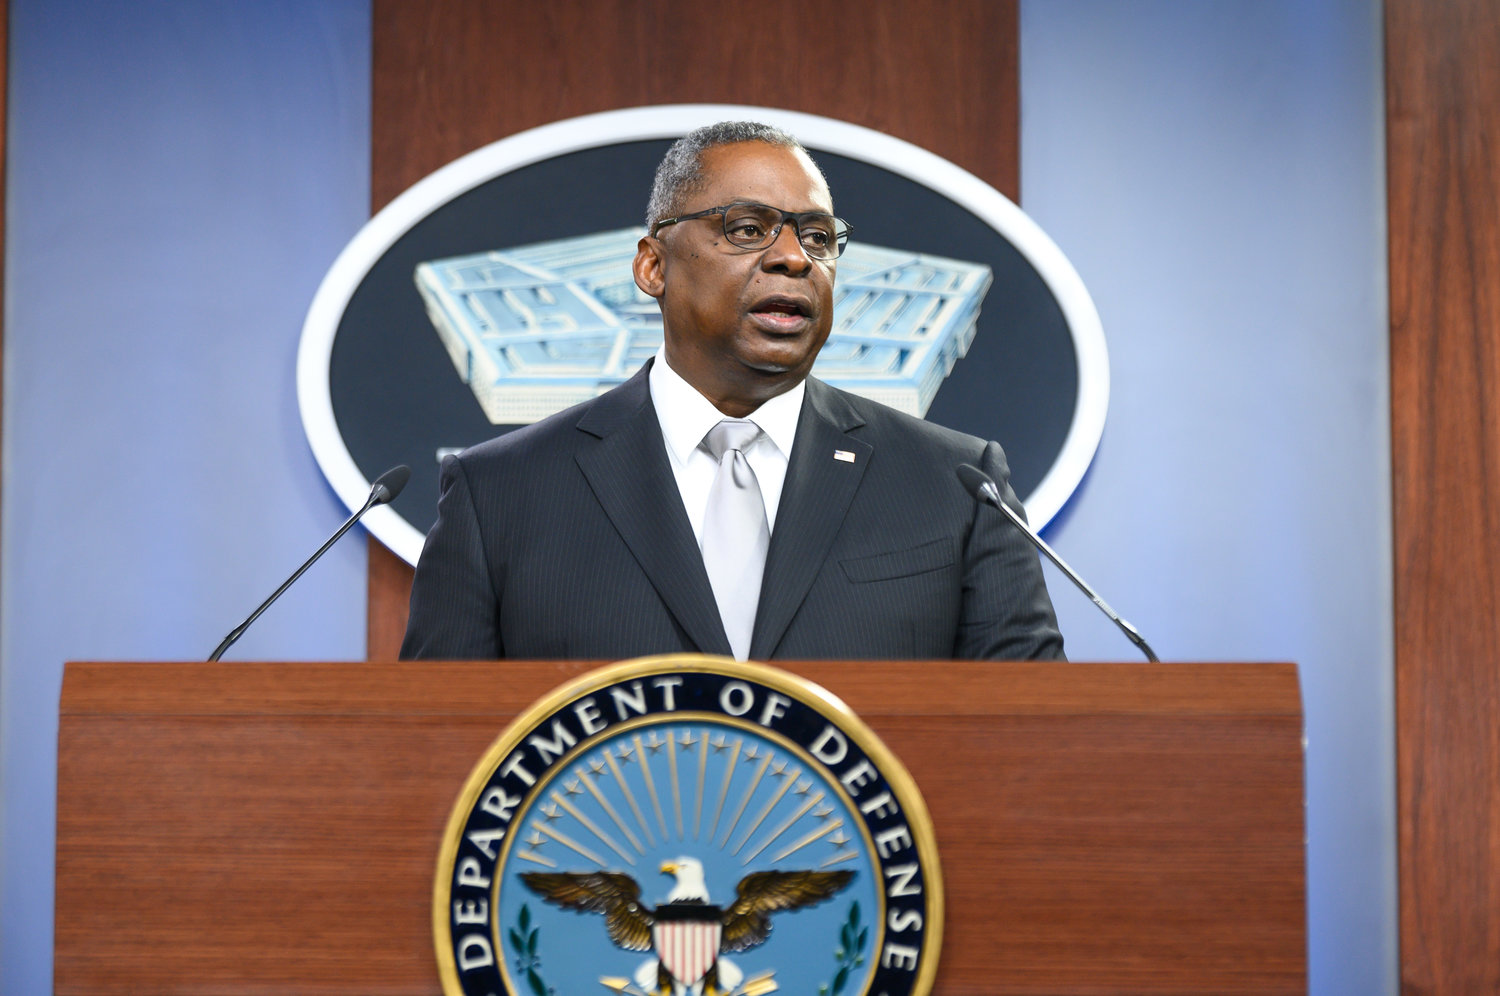 Secretary of Defense Lloyd J. Austin III is scheduled to visit Fort Bragg on Tuesday, He will meet with troops who recently returned from a nine-month deployment to Europe.